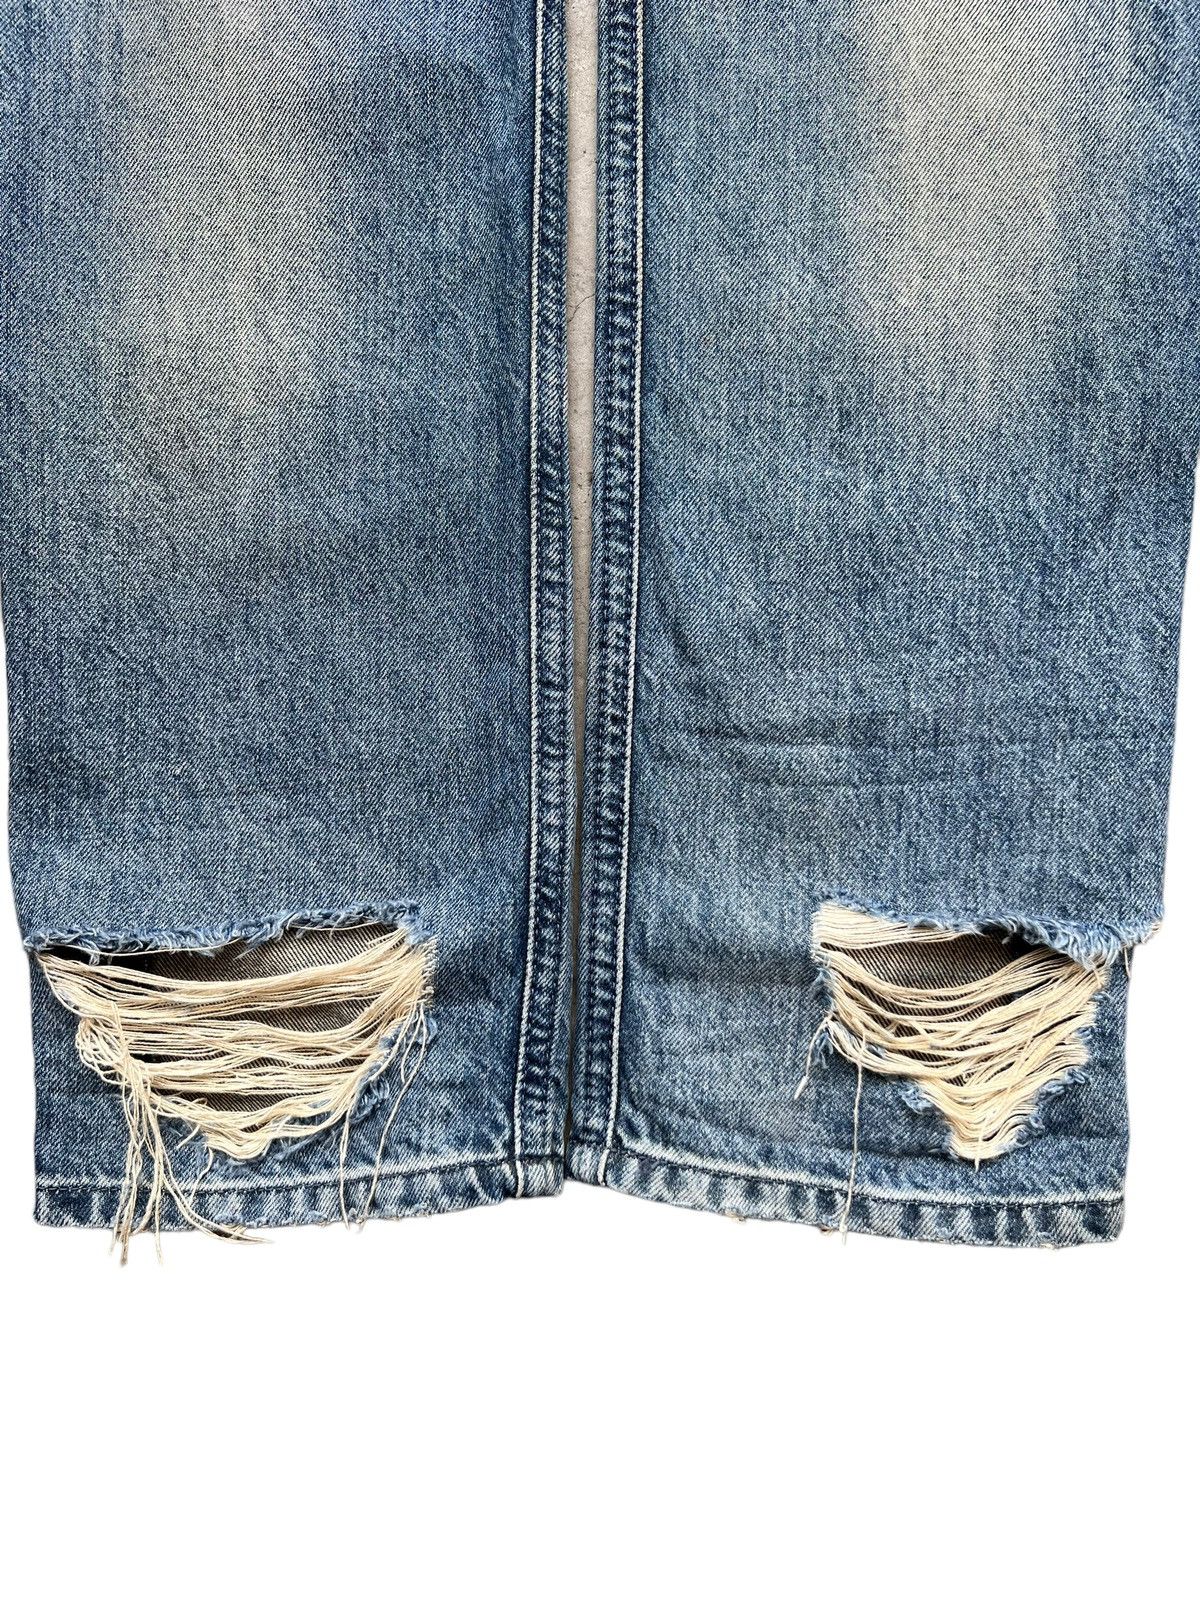 💥Rare💥 Diesel Distressed Ripped Thrashed Denim Jeans 31x31.5 - 8